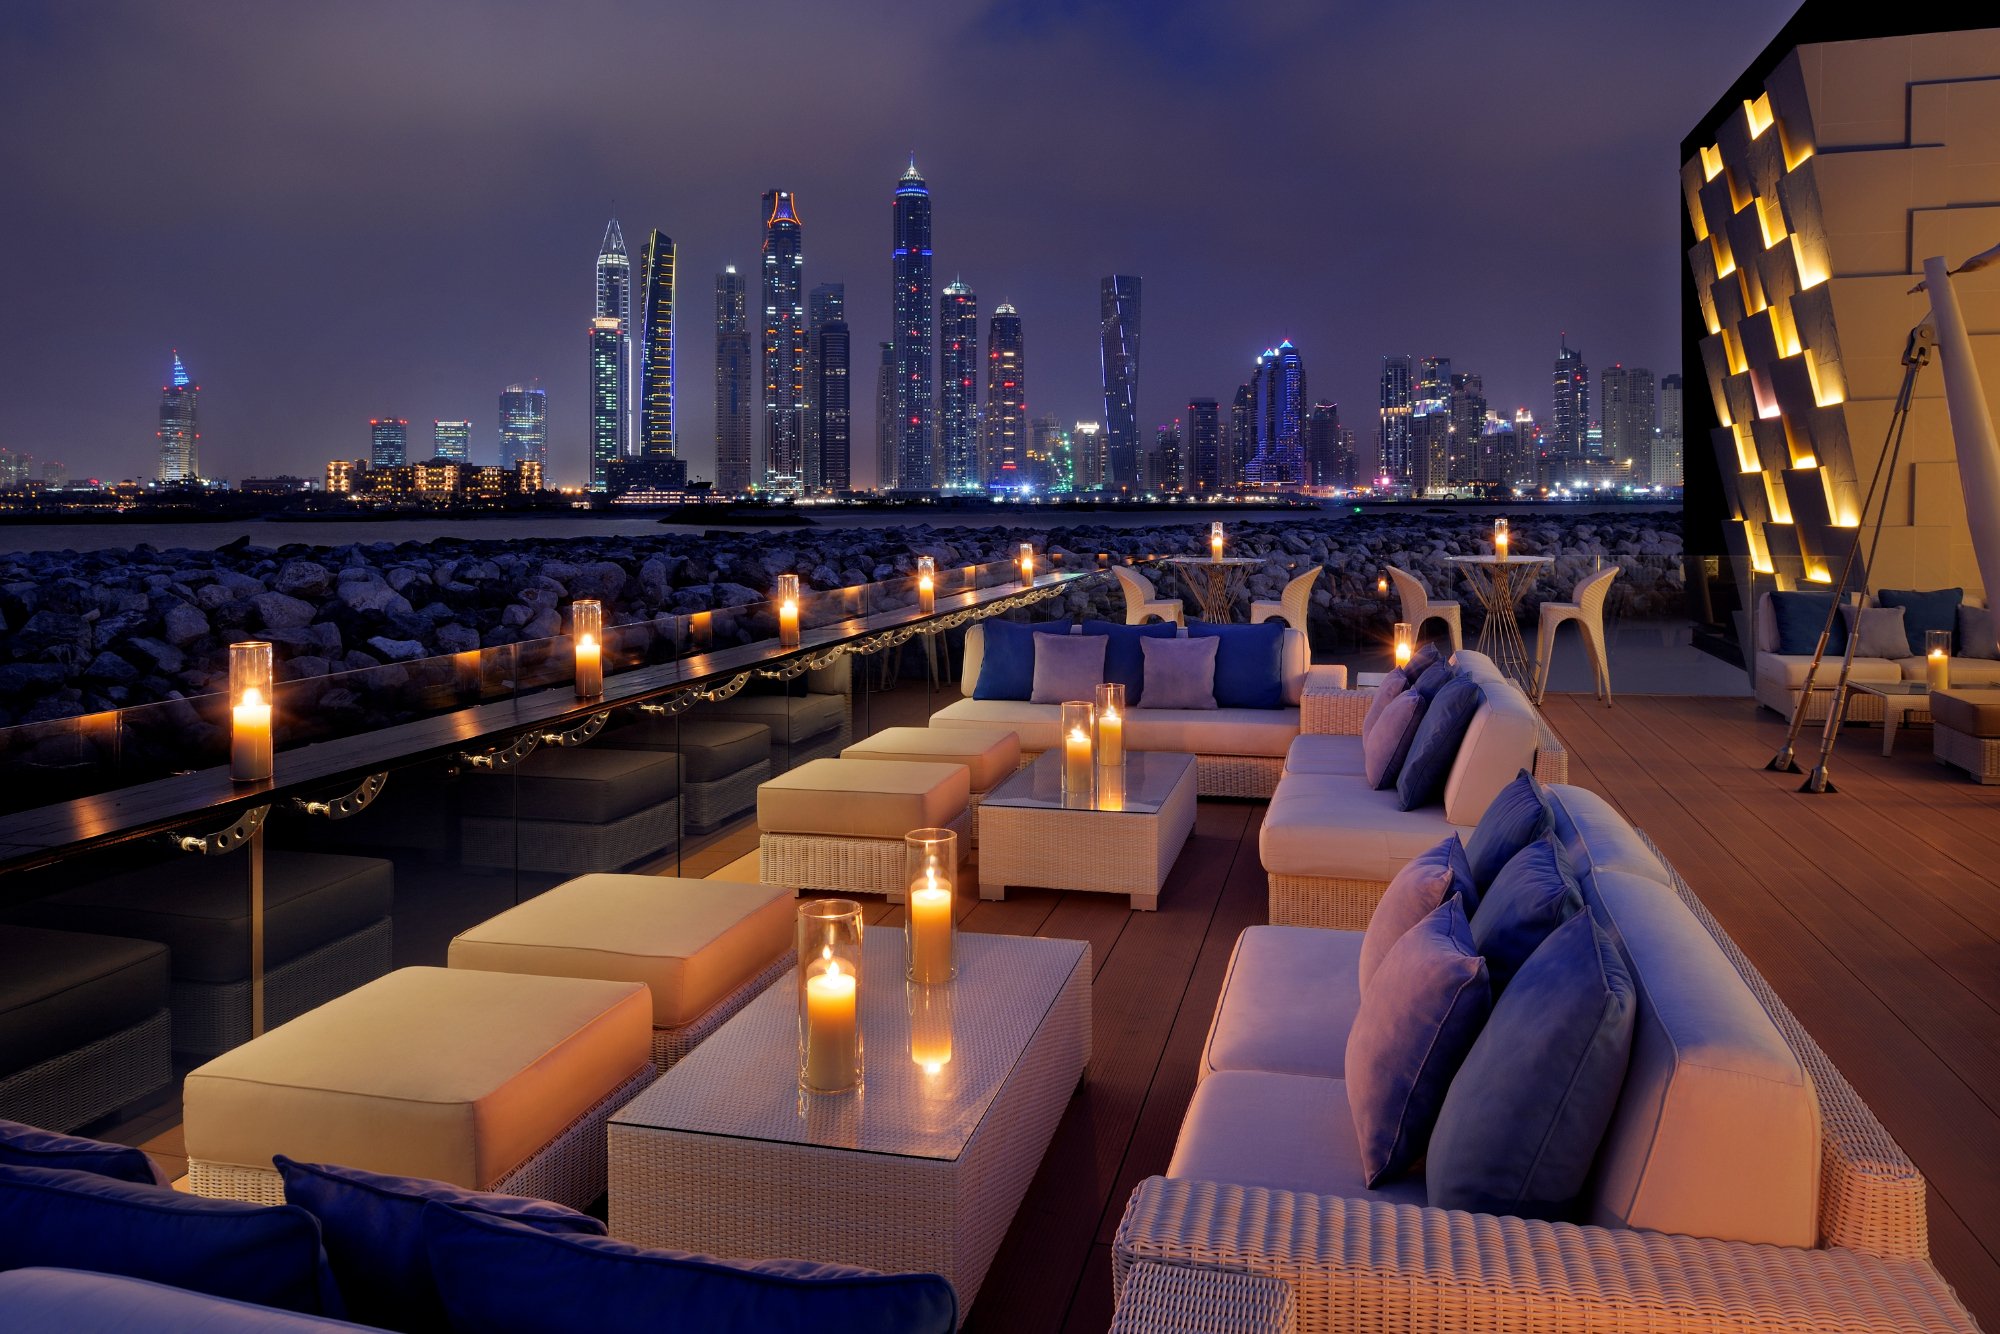 Top Hotels to Stay in Dubai to impress your other half